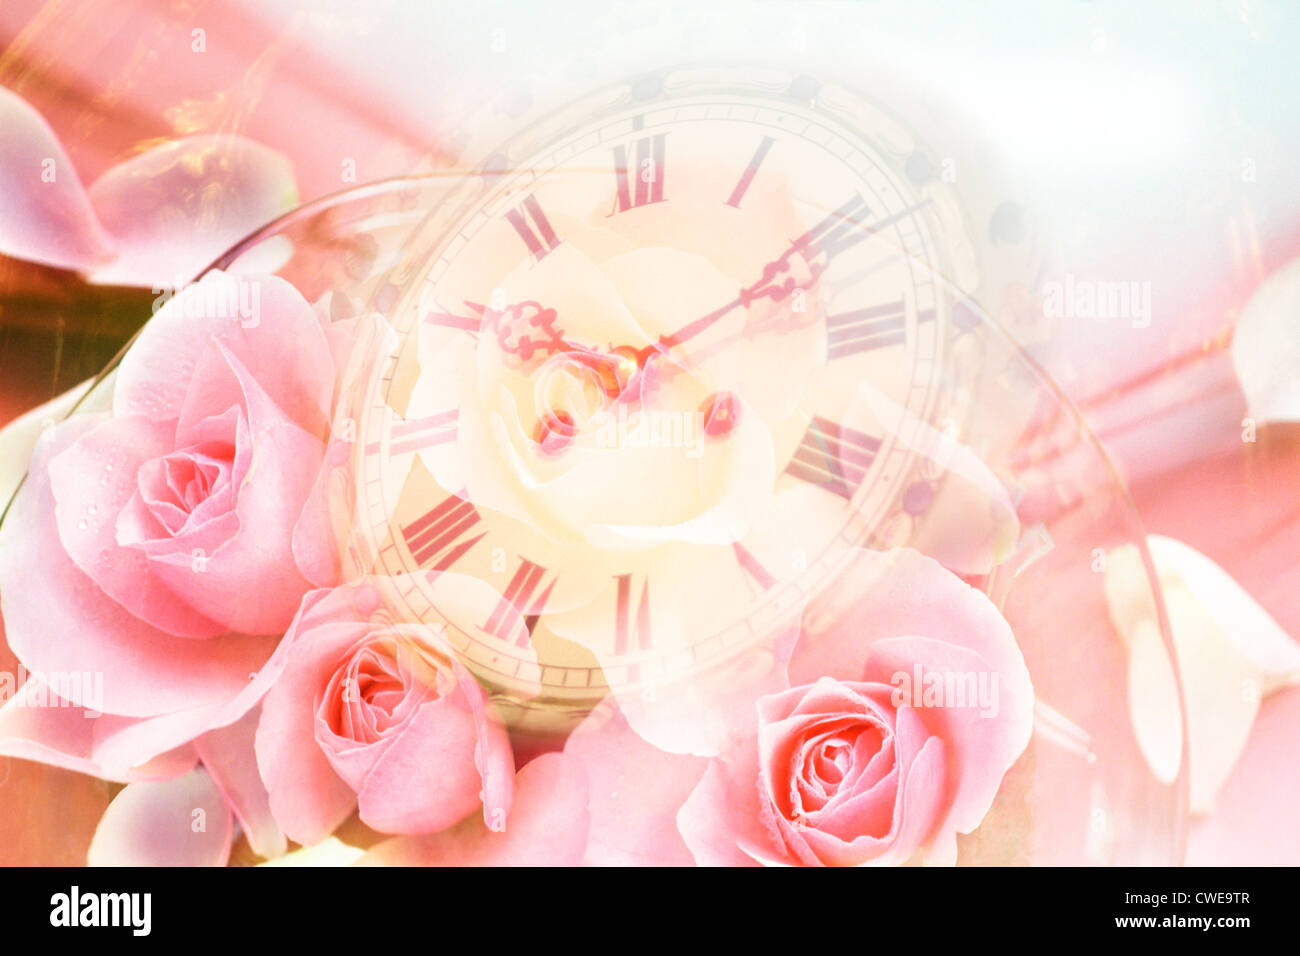 Digitally Altered Image Of Clock And Pink Roses Stock Photo